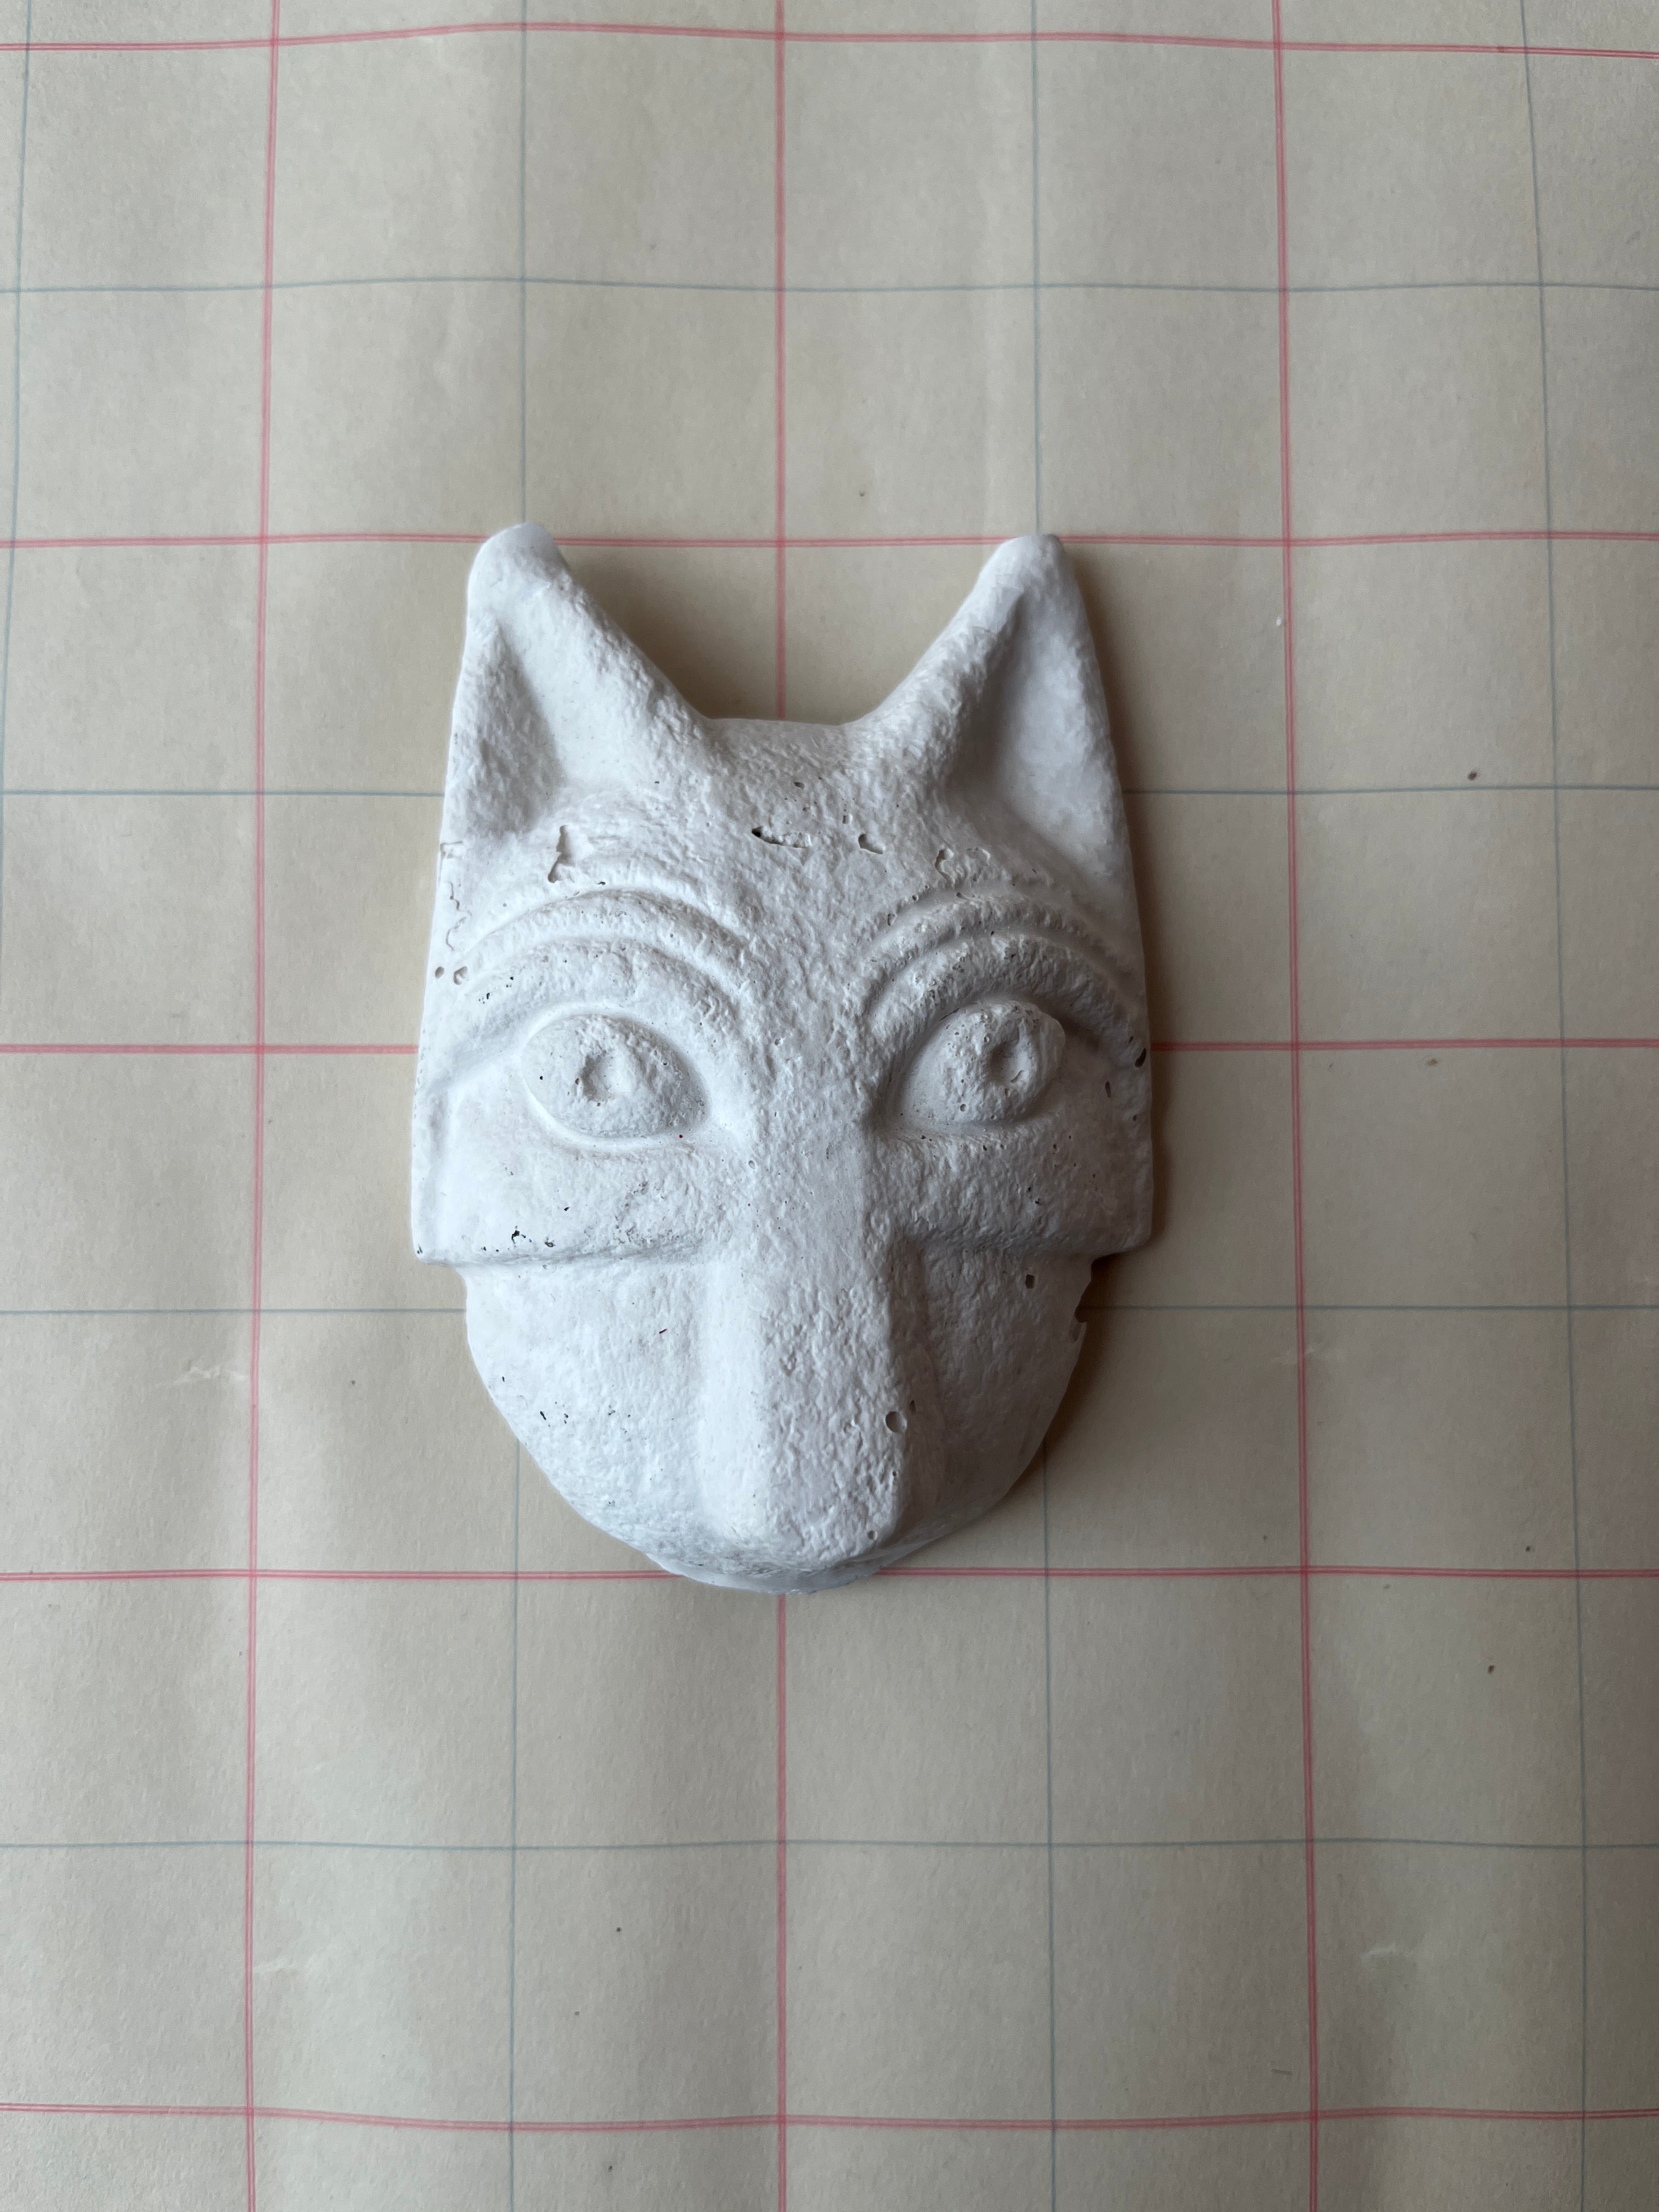 Plaster Cat Wall-hanging